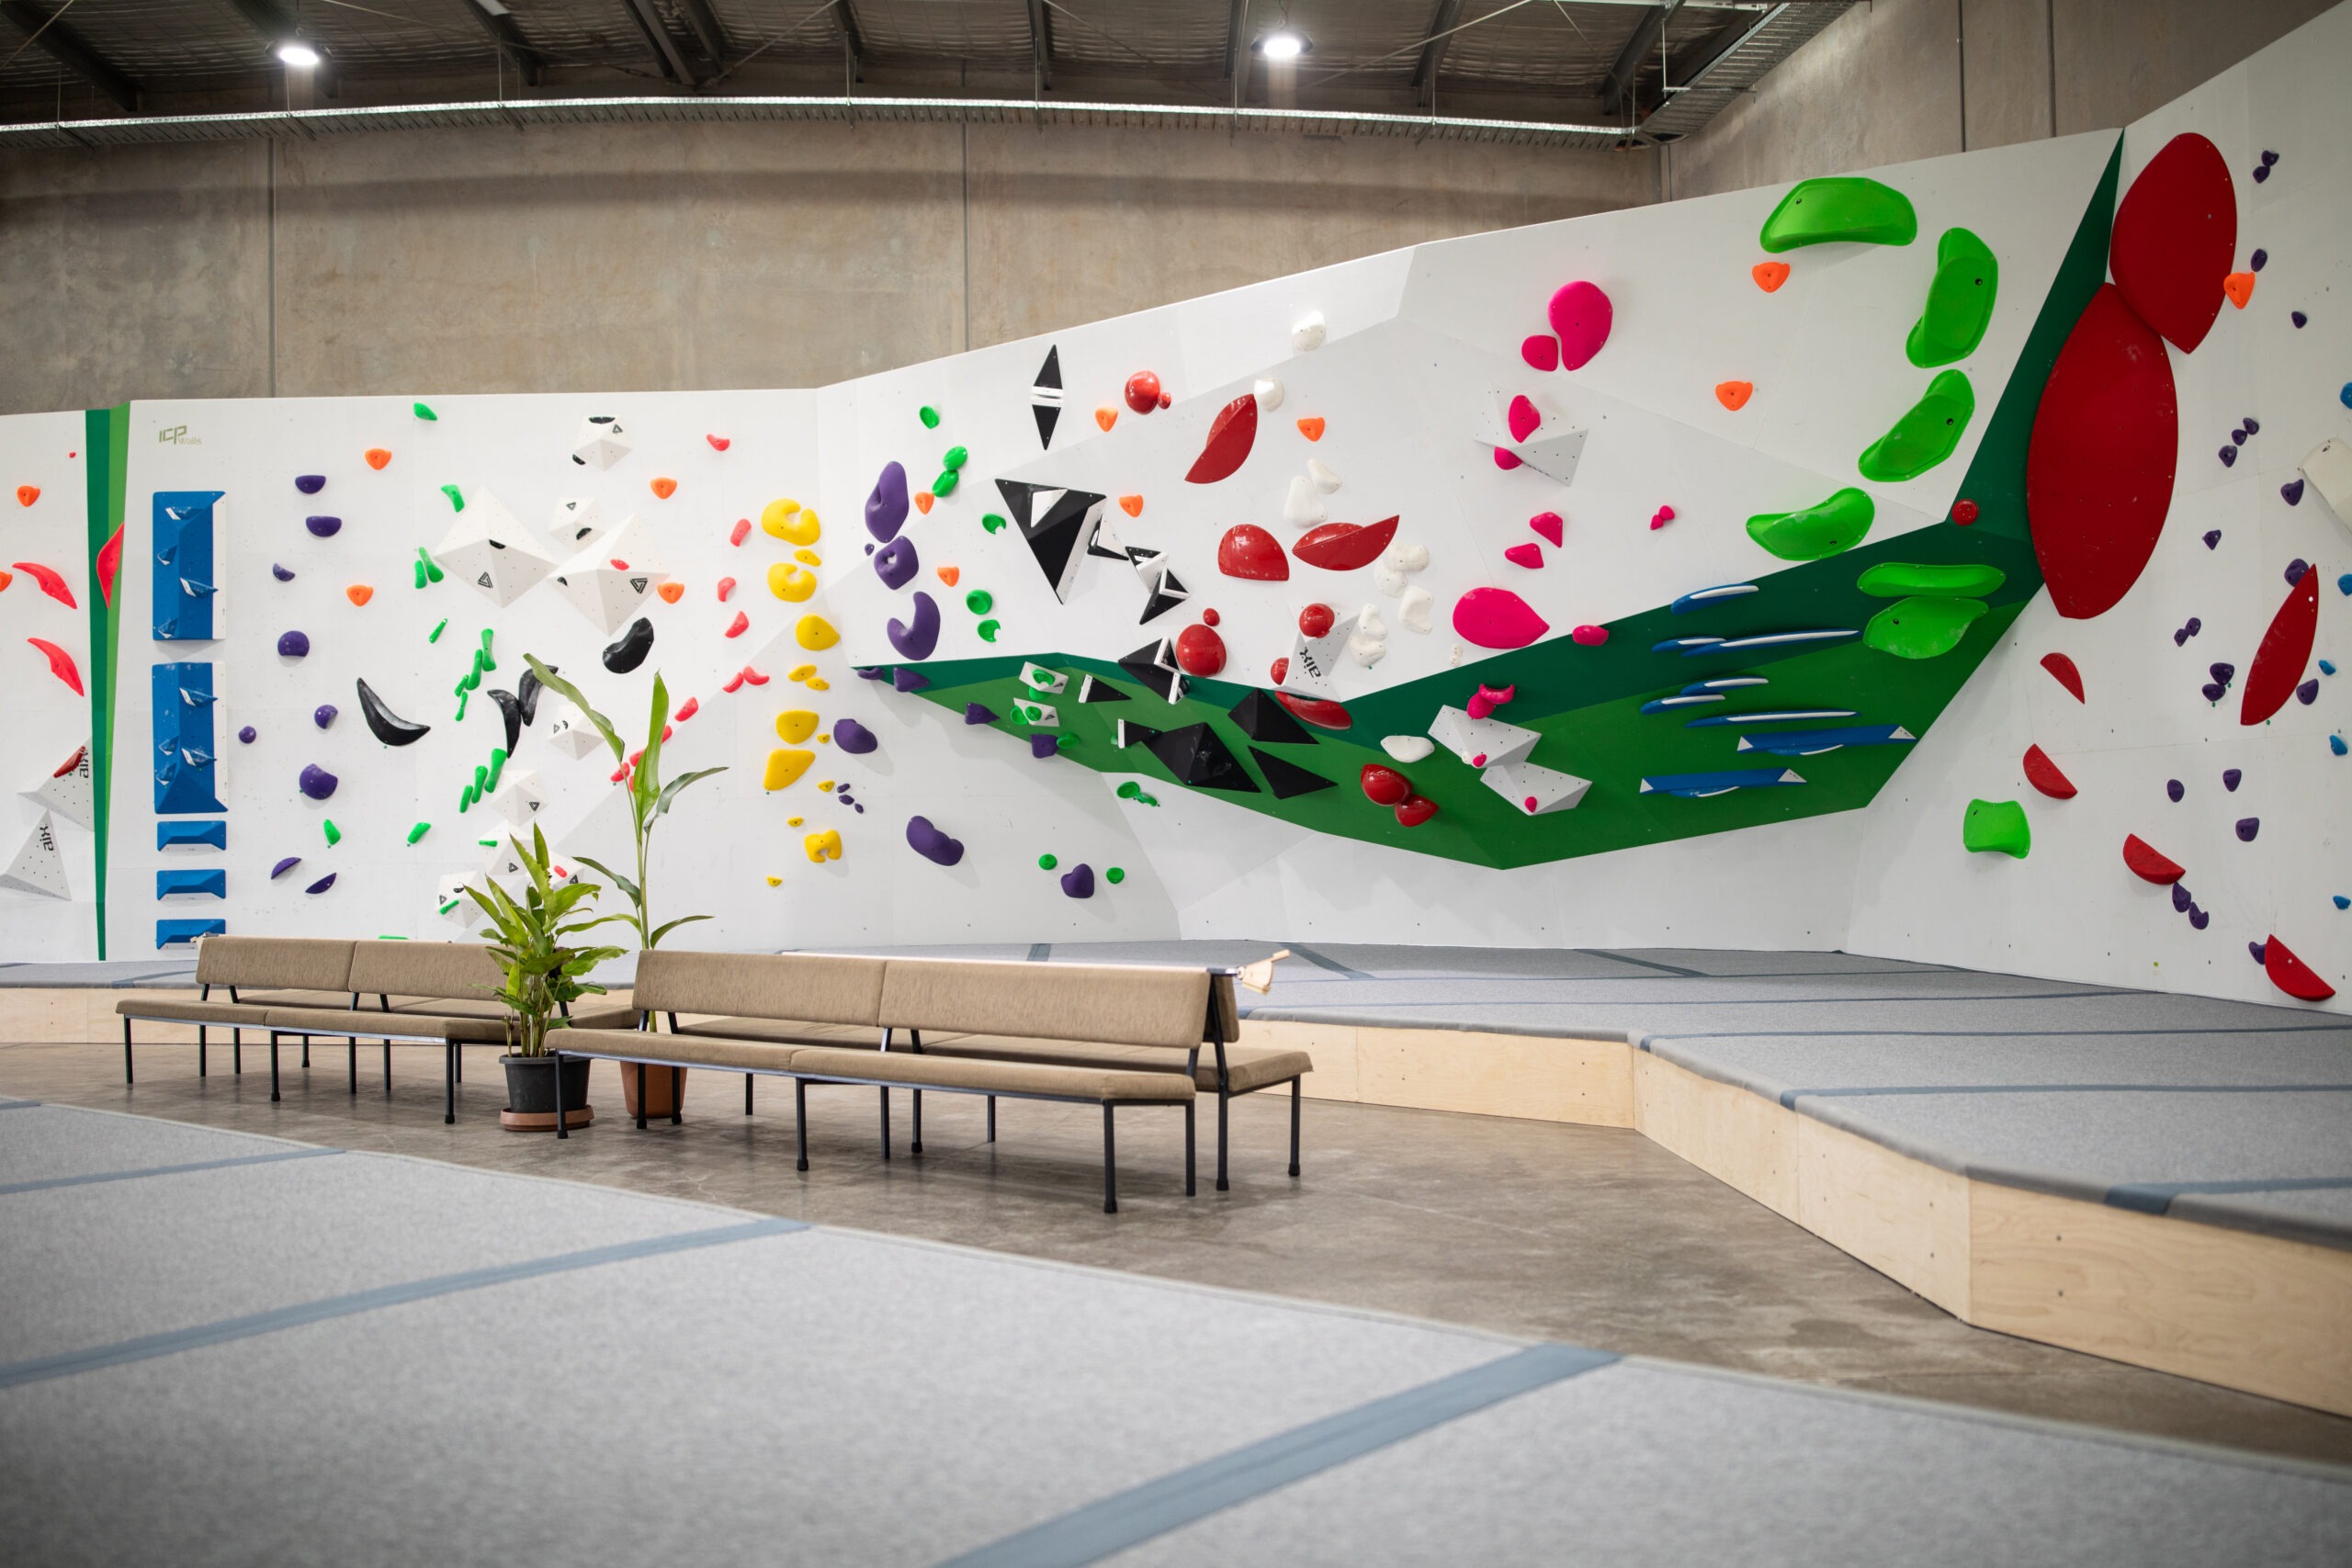 The bouldering mats installed by ICP are covered by grey carpet and dark grey connectors. The Mats are also surrounded by a stylish white and green climbing wall filled with colourful climbing routes and holds. 